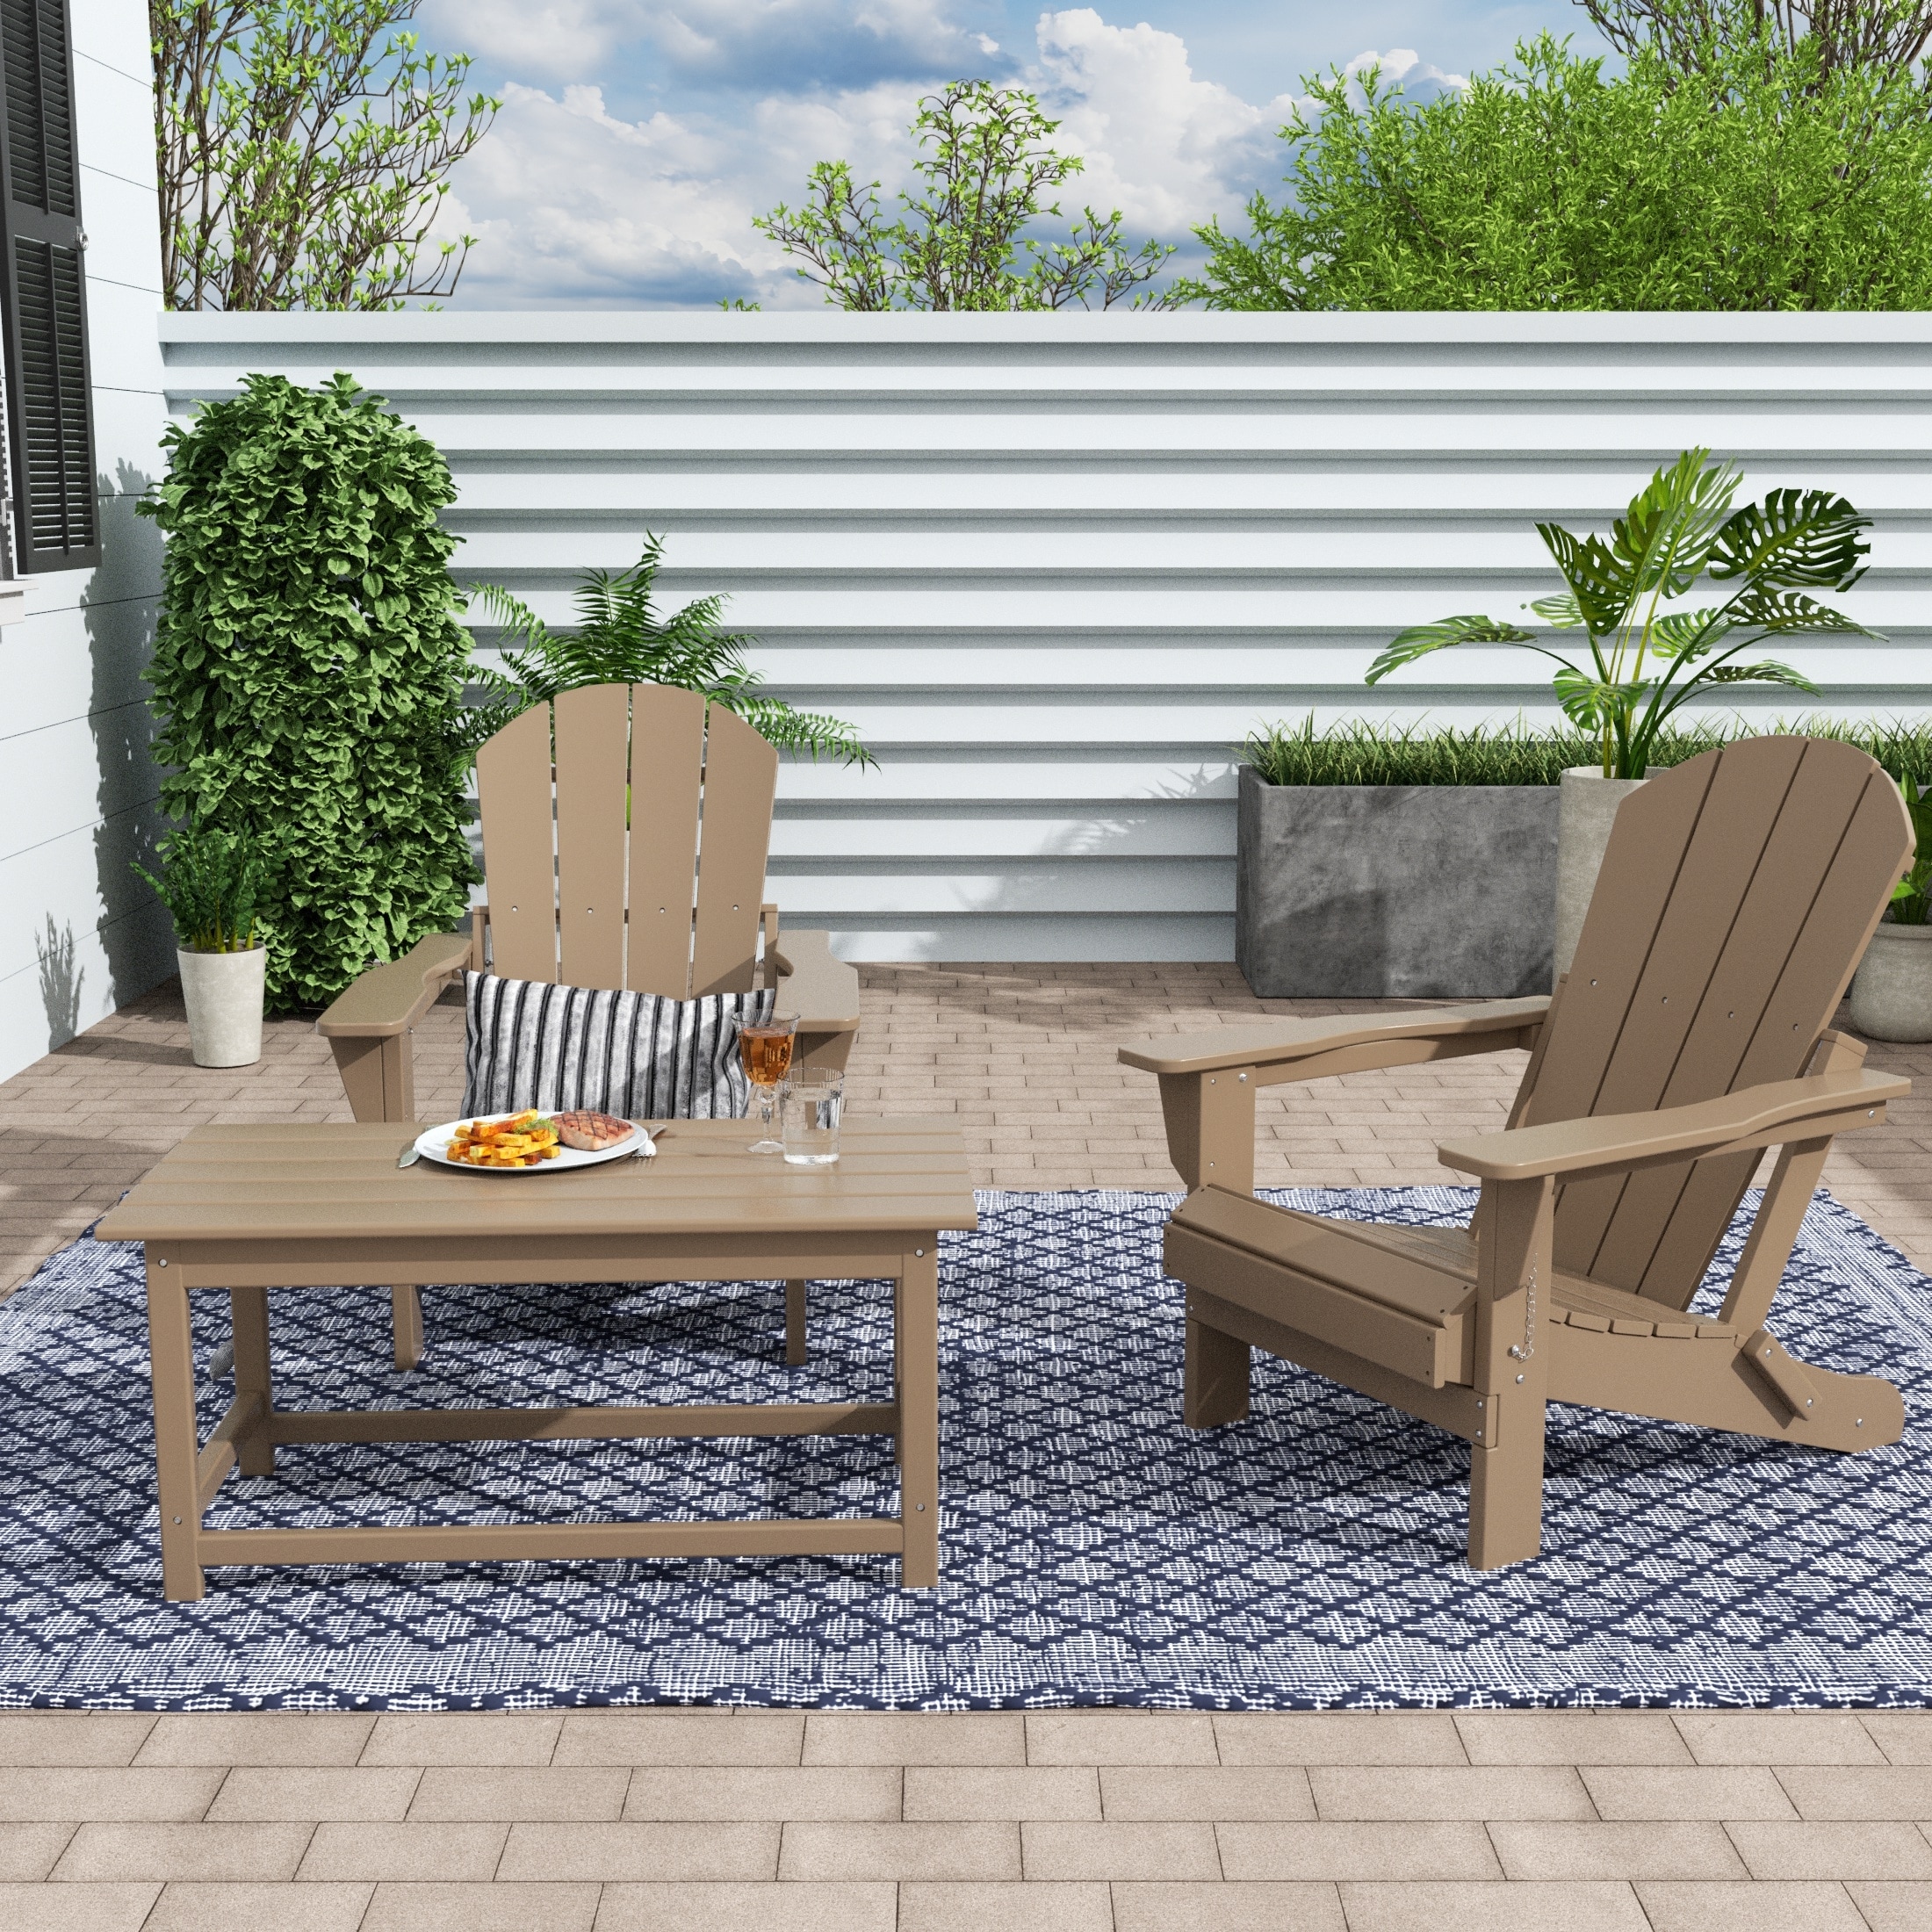 Polytrends Laguna All Weather Poly Outdoor Patio Adirondack Chairs Set - With Coffee Table (3-piece)